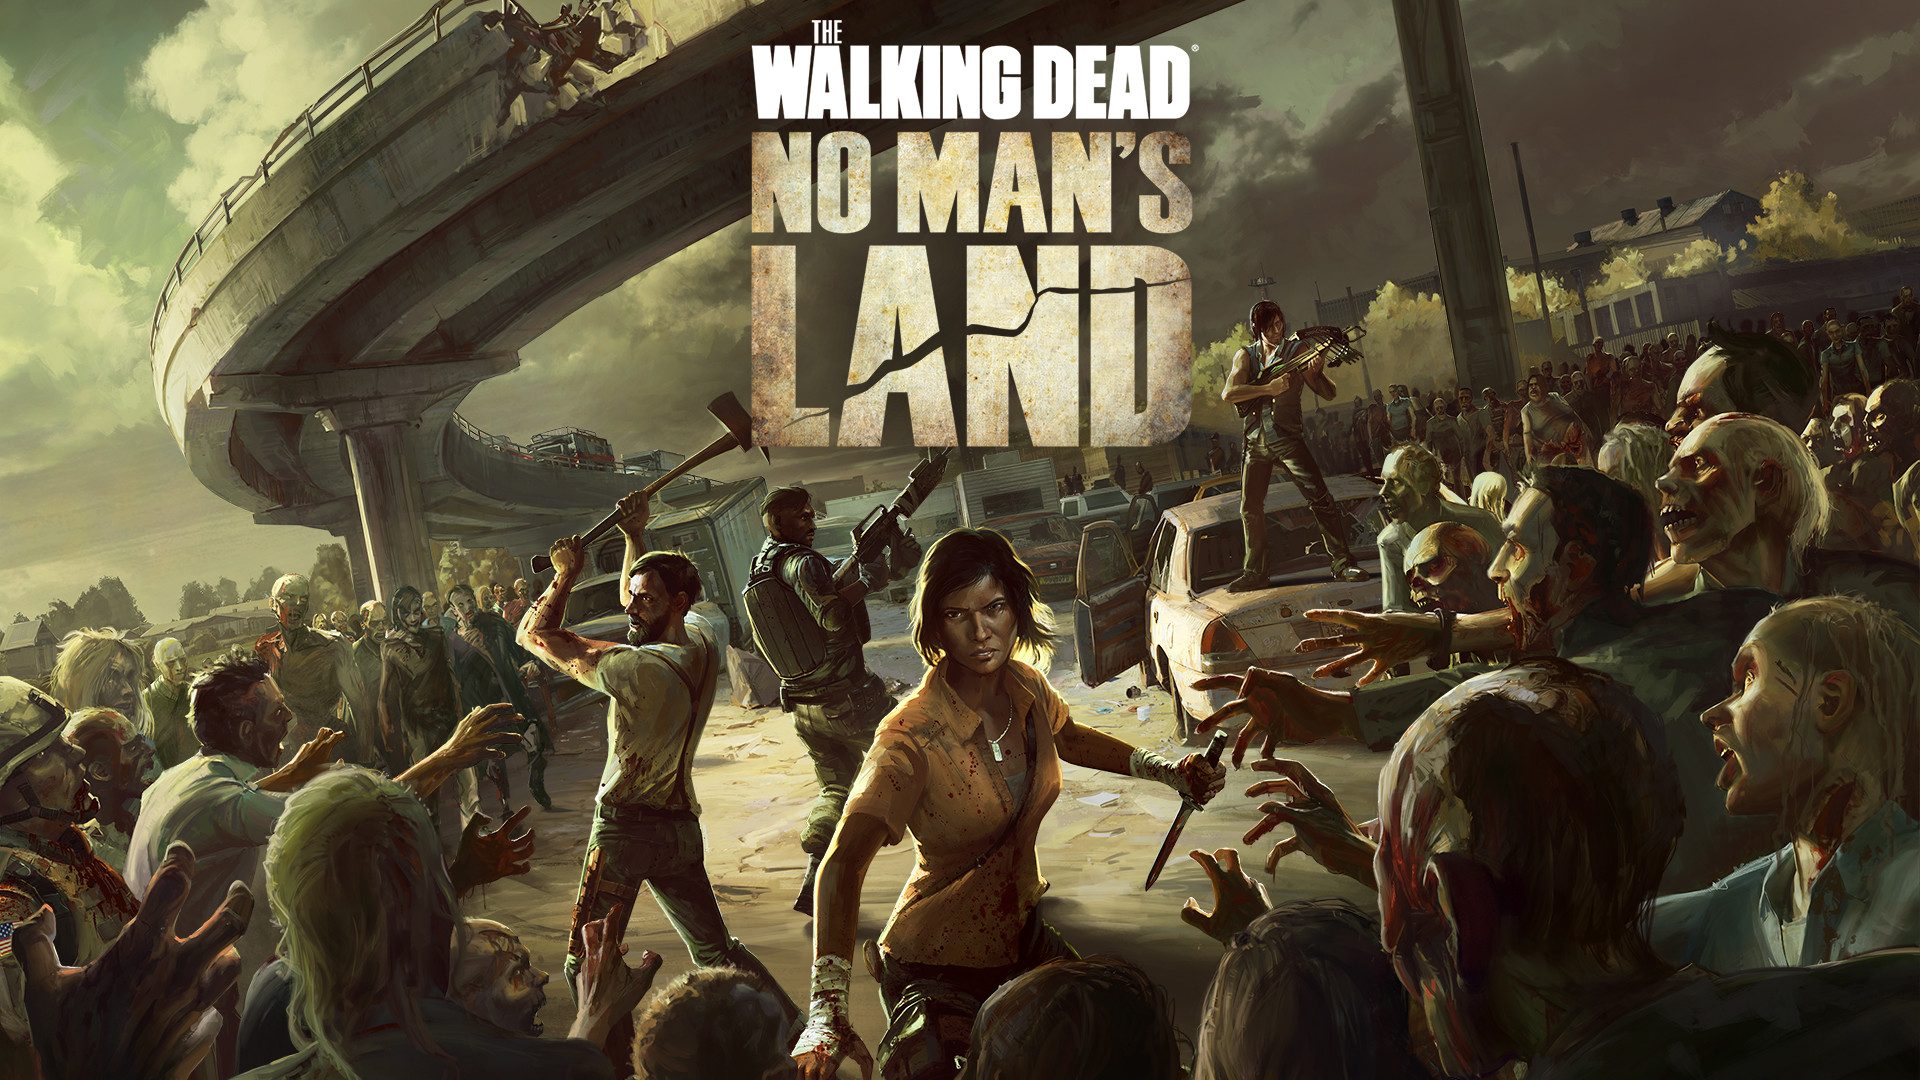 Walking dead no man s land integrated to the walking dead walking dead live wallpapers wallpapers â